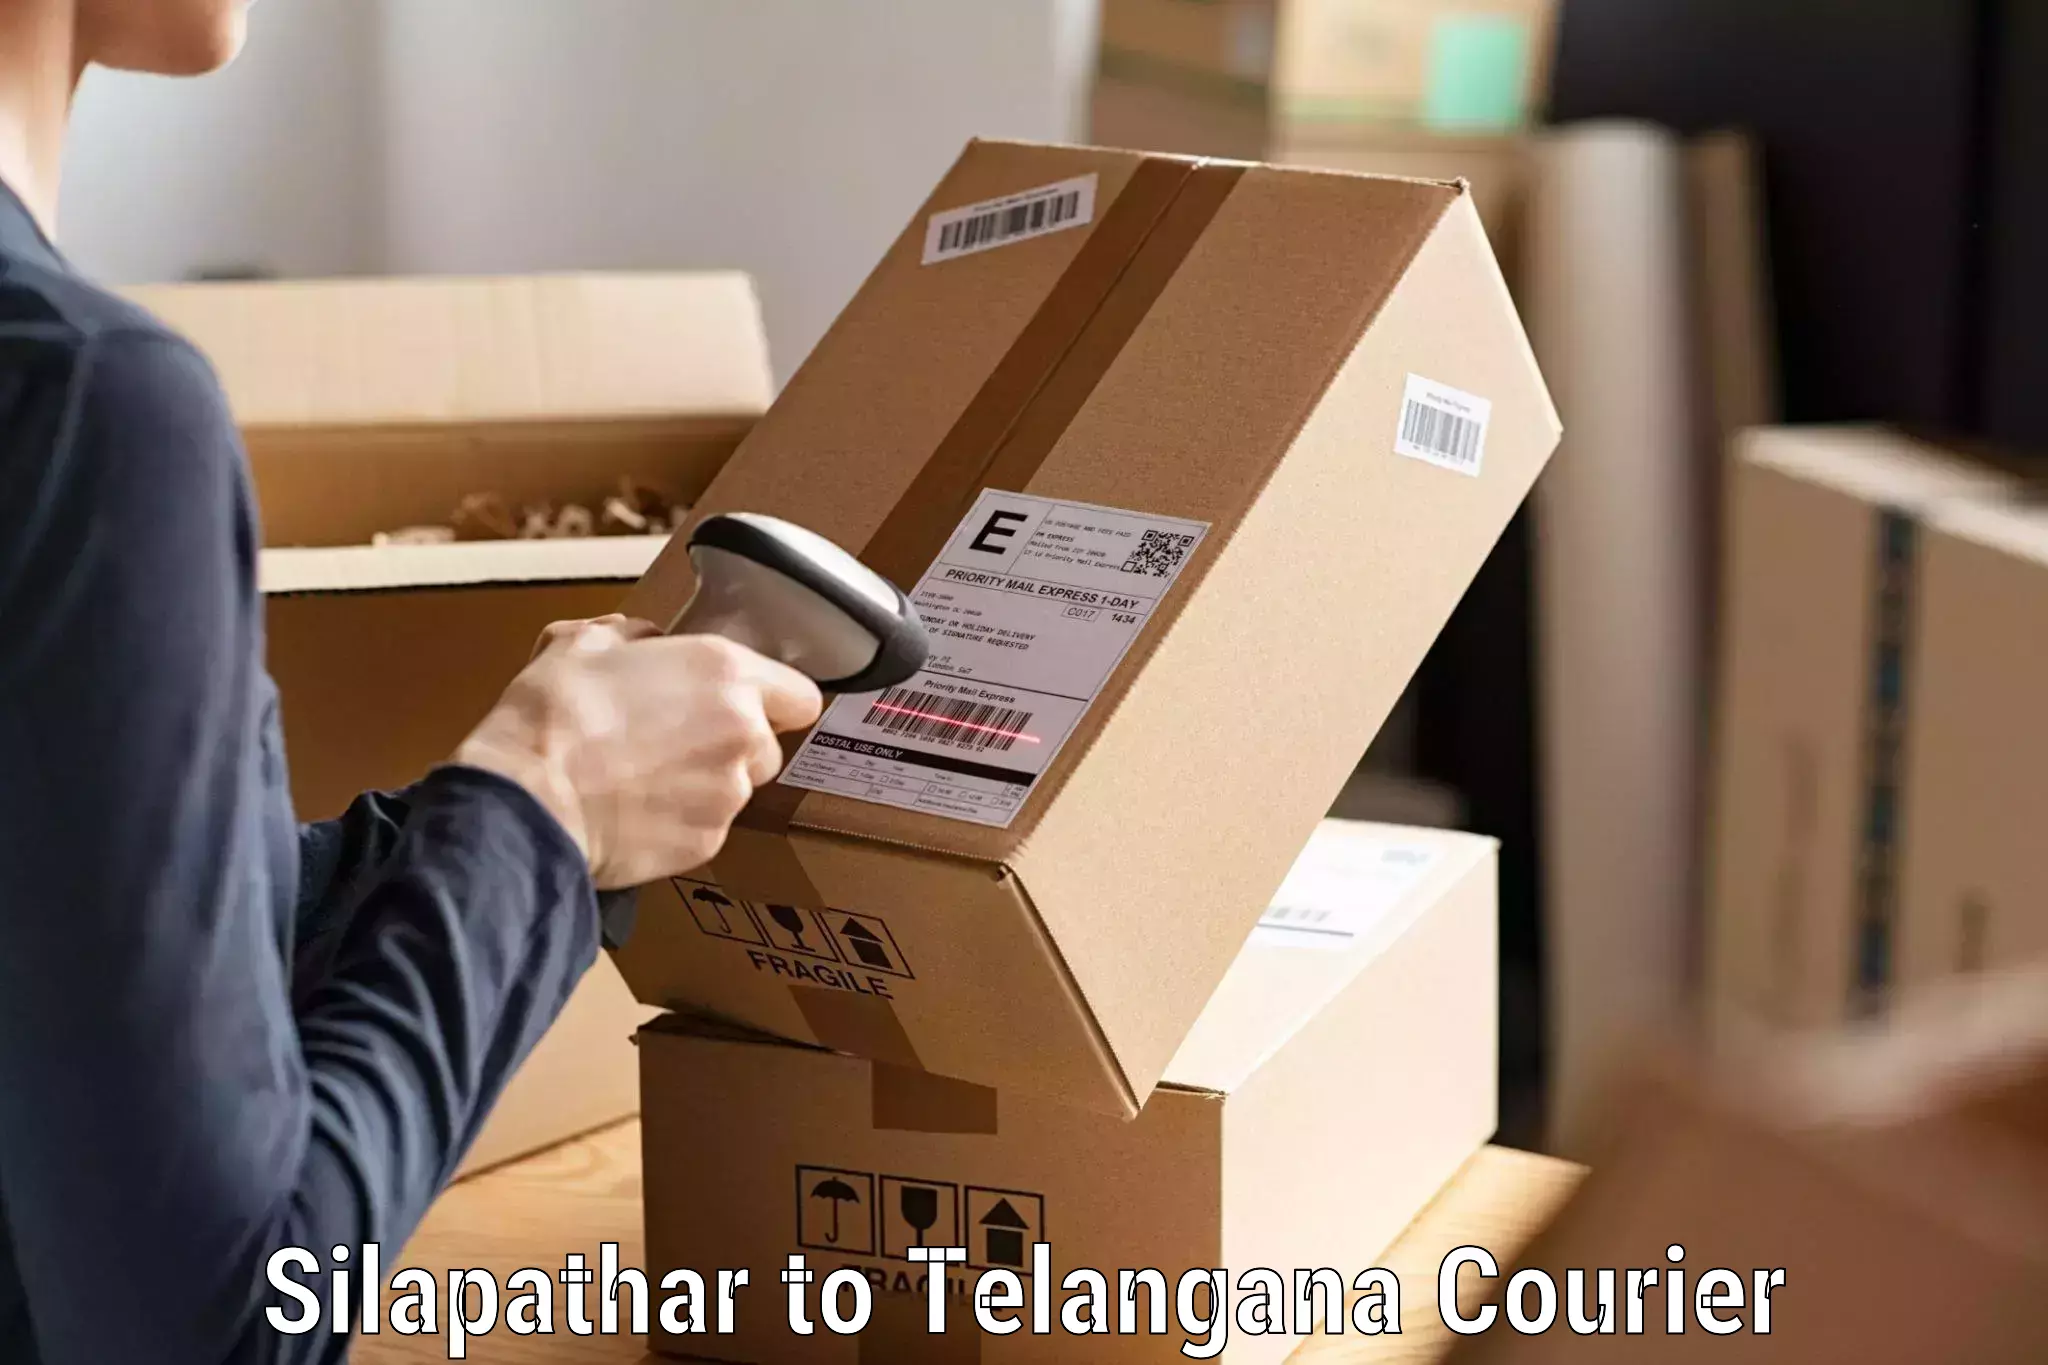 High-speed parcel service Silapathar to Wyra